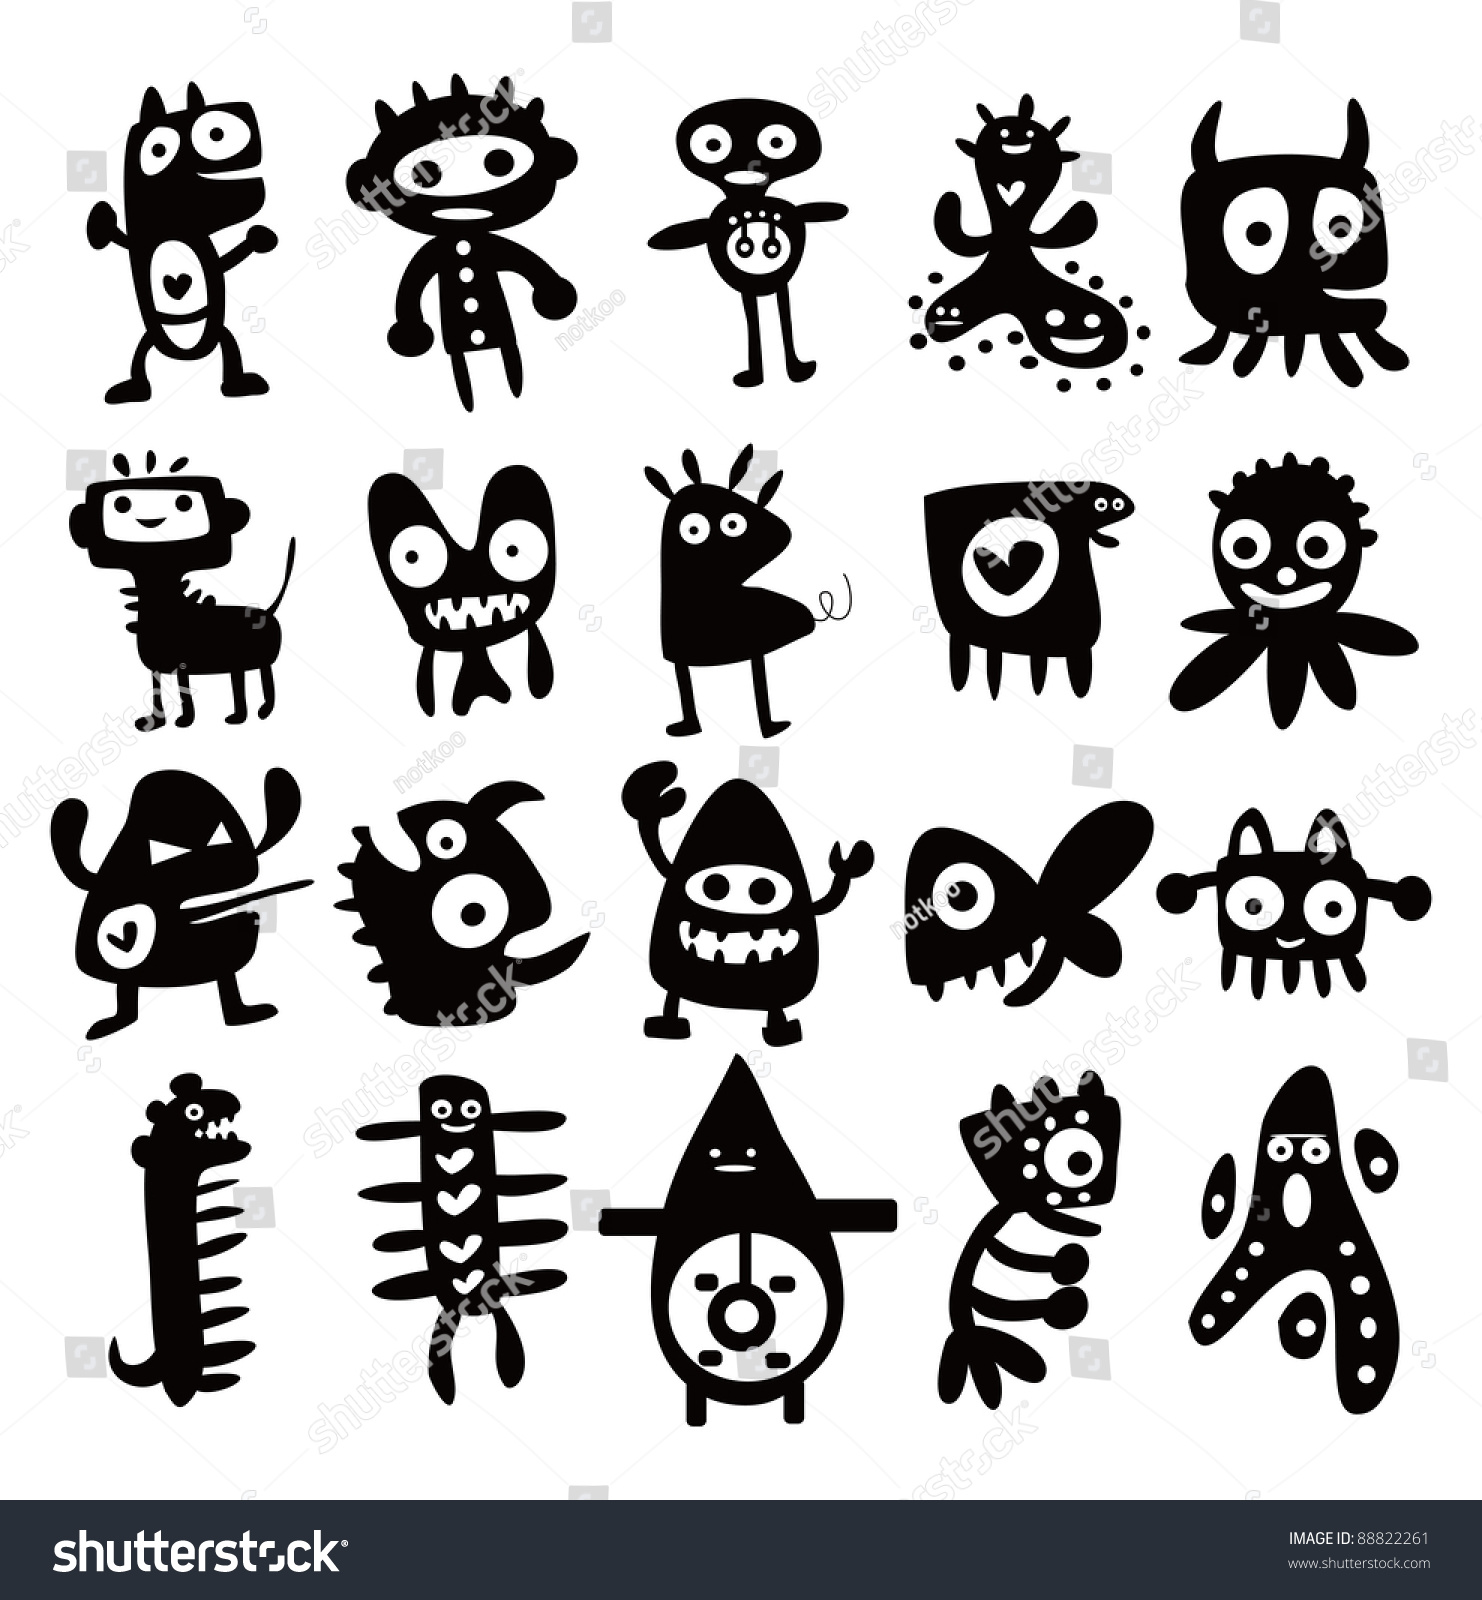 Collection Of Cartoon Funny Monsters Silhouettes Stock Vector ...